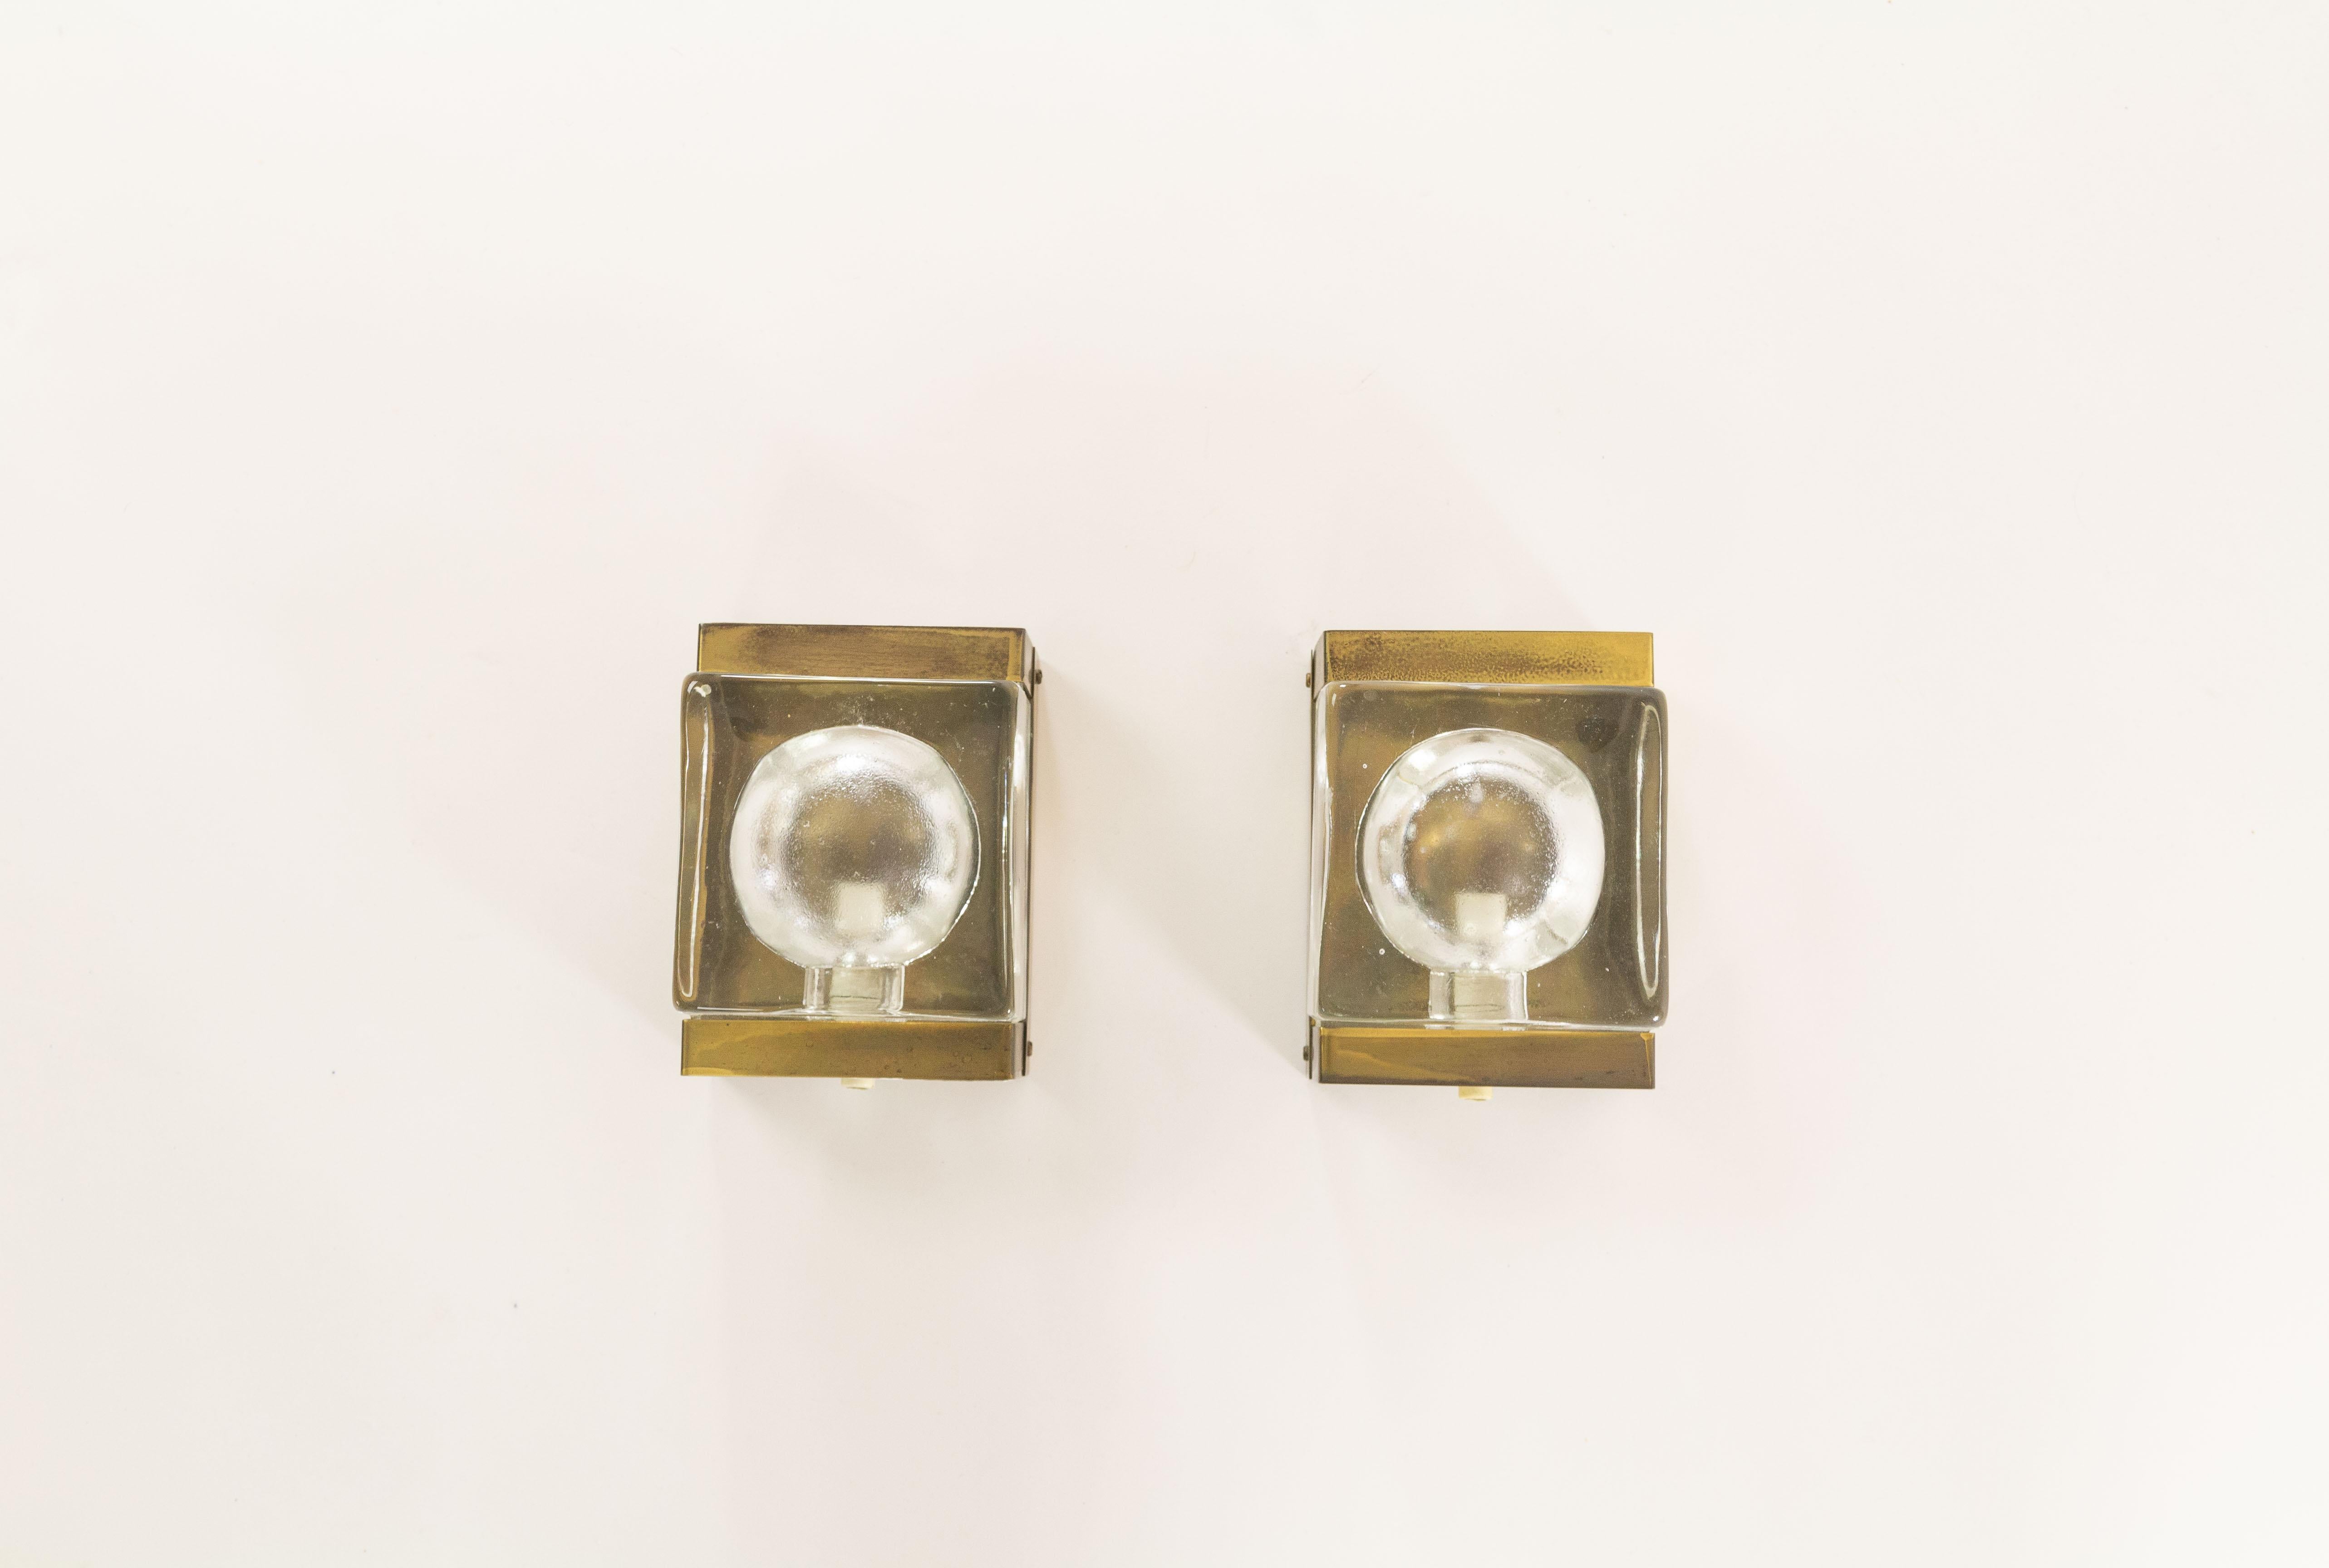 A set of two rare white Maritim Lampet wall lamps, produced by Danish lighting manufacturer Vitrika in the 1970s.

Both lamps consist of two parts: a solid and so rather heavy handmade glass body (2.4 kg / 5.3 lbs) and the brass holder.

Price